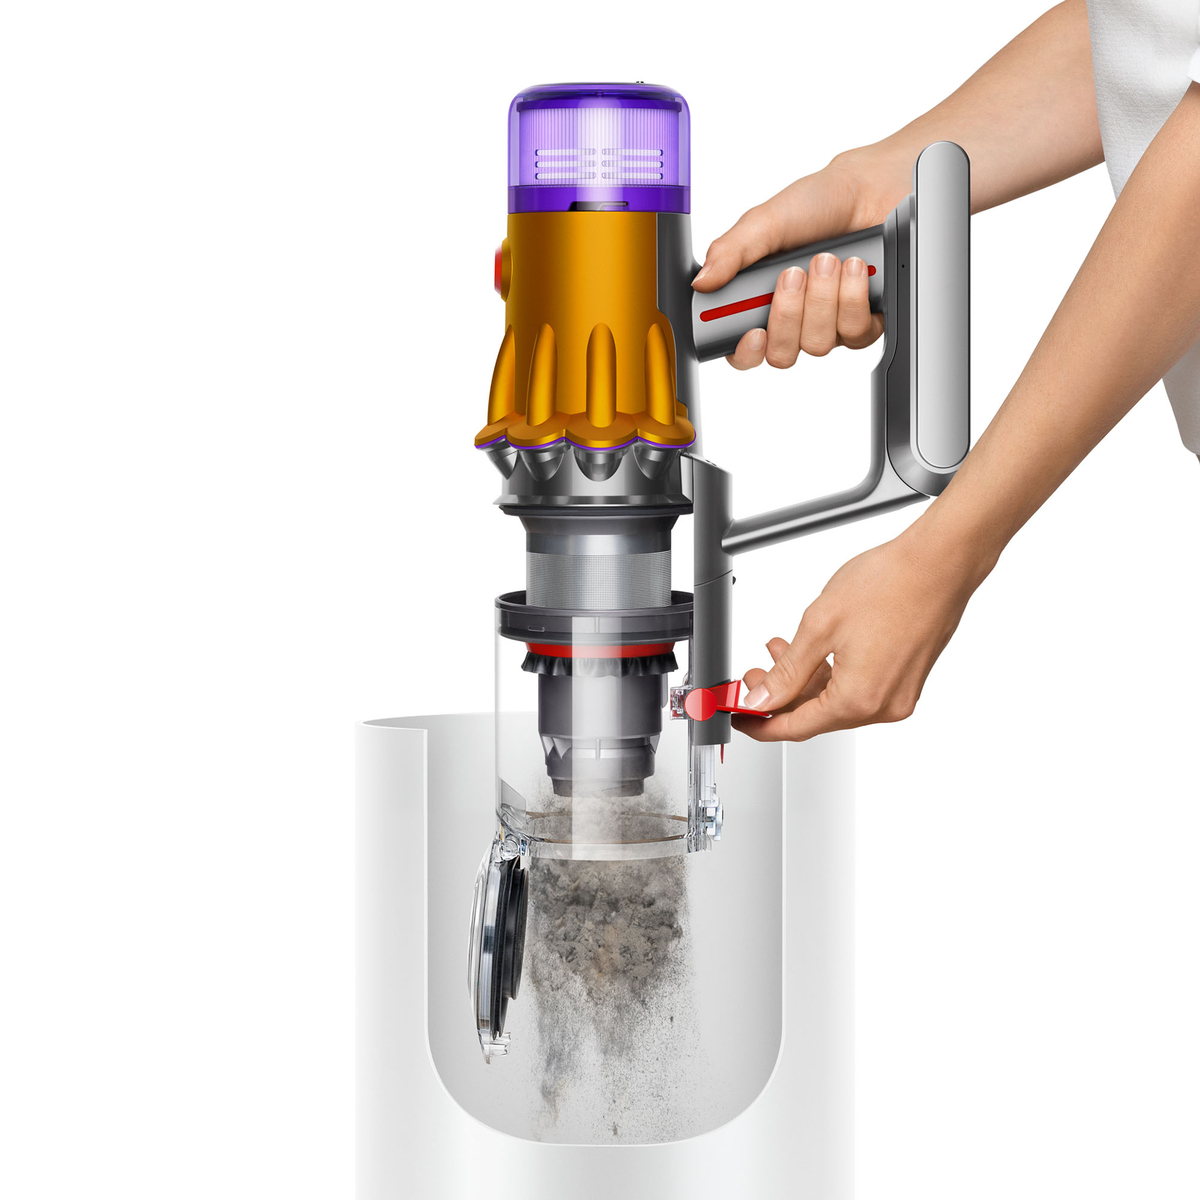  Dyson V12 Detect Slim Absolute Cordless Vacuum Cleaner -  Yellow, HEPA Filter, Up to 60 Min Runtime, LCD Screen Displays, 2-Year  Warranty, with MTC Microfiber Cloth